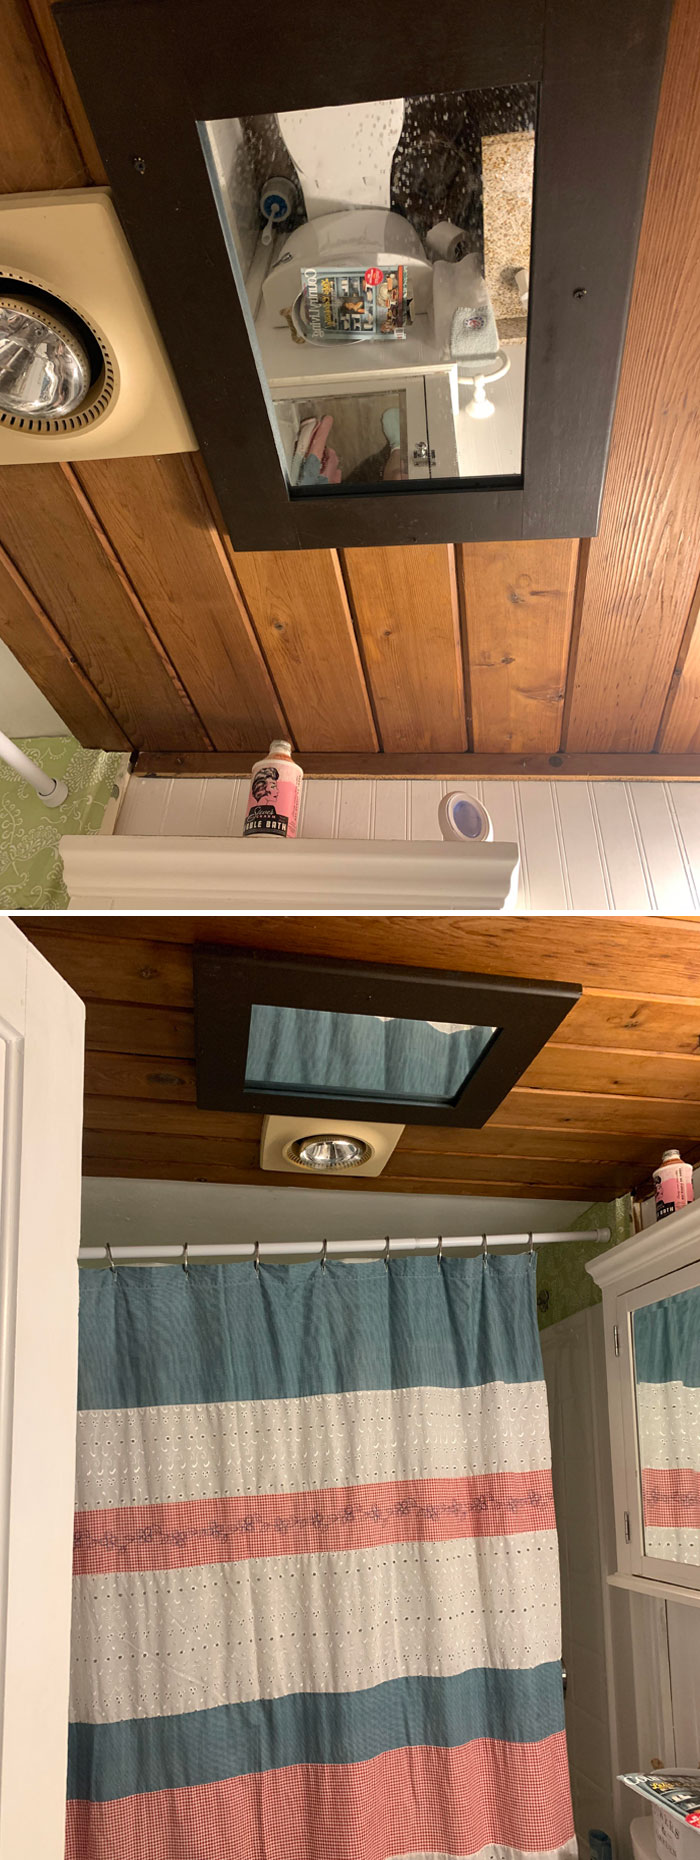 There’s A Mirror Screwed Into The Ceiling Above The Toilet In My Airbnb